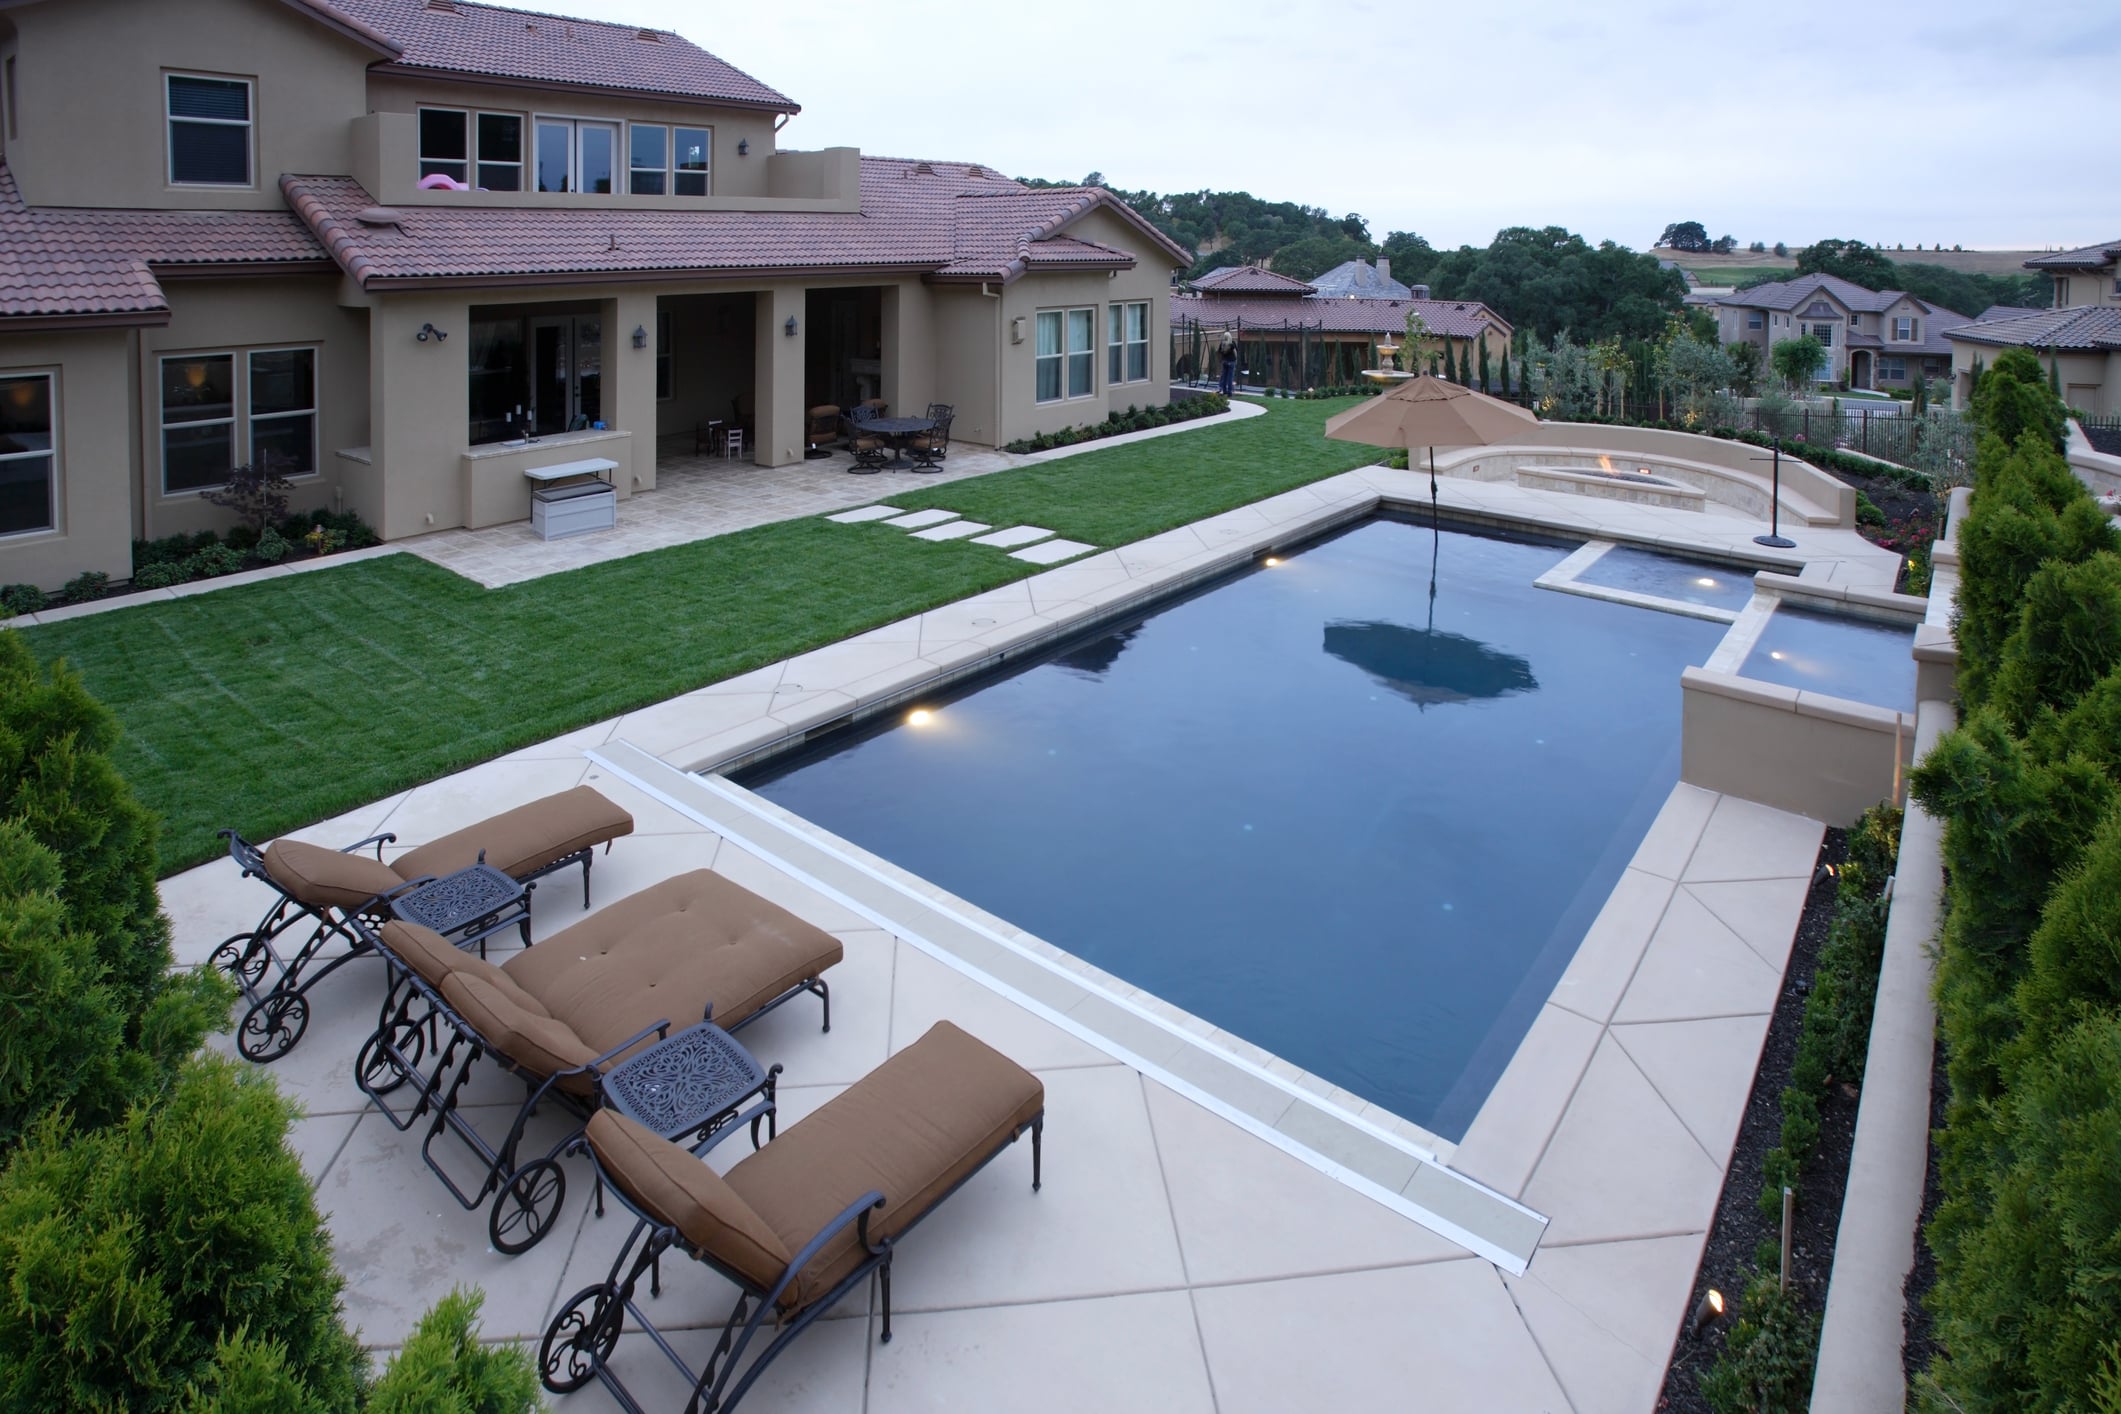 Making your pool more energy efficient is easy with HFS Financial.